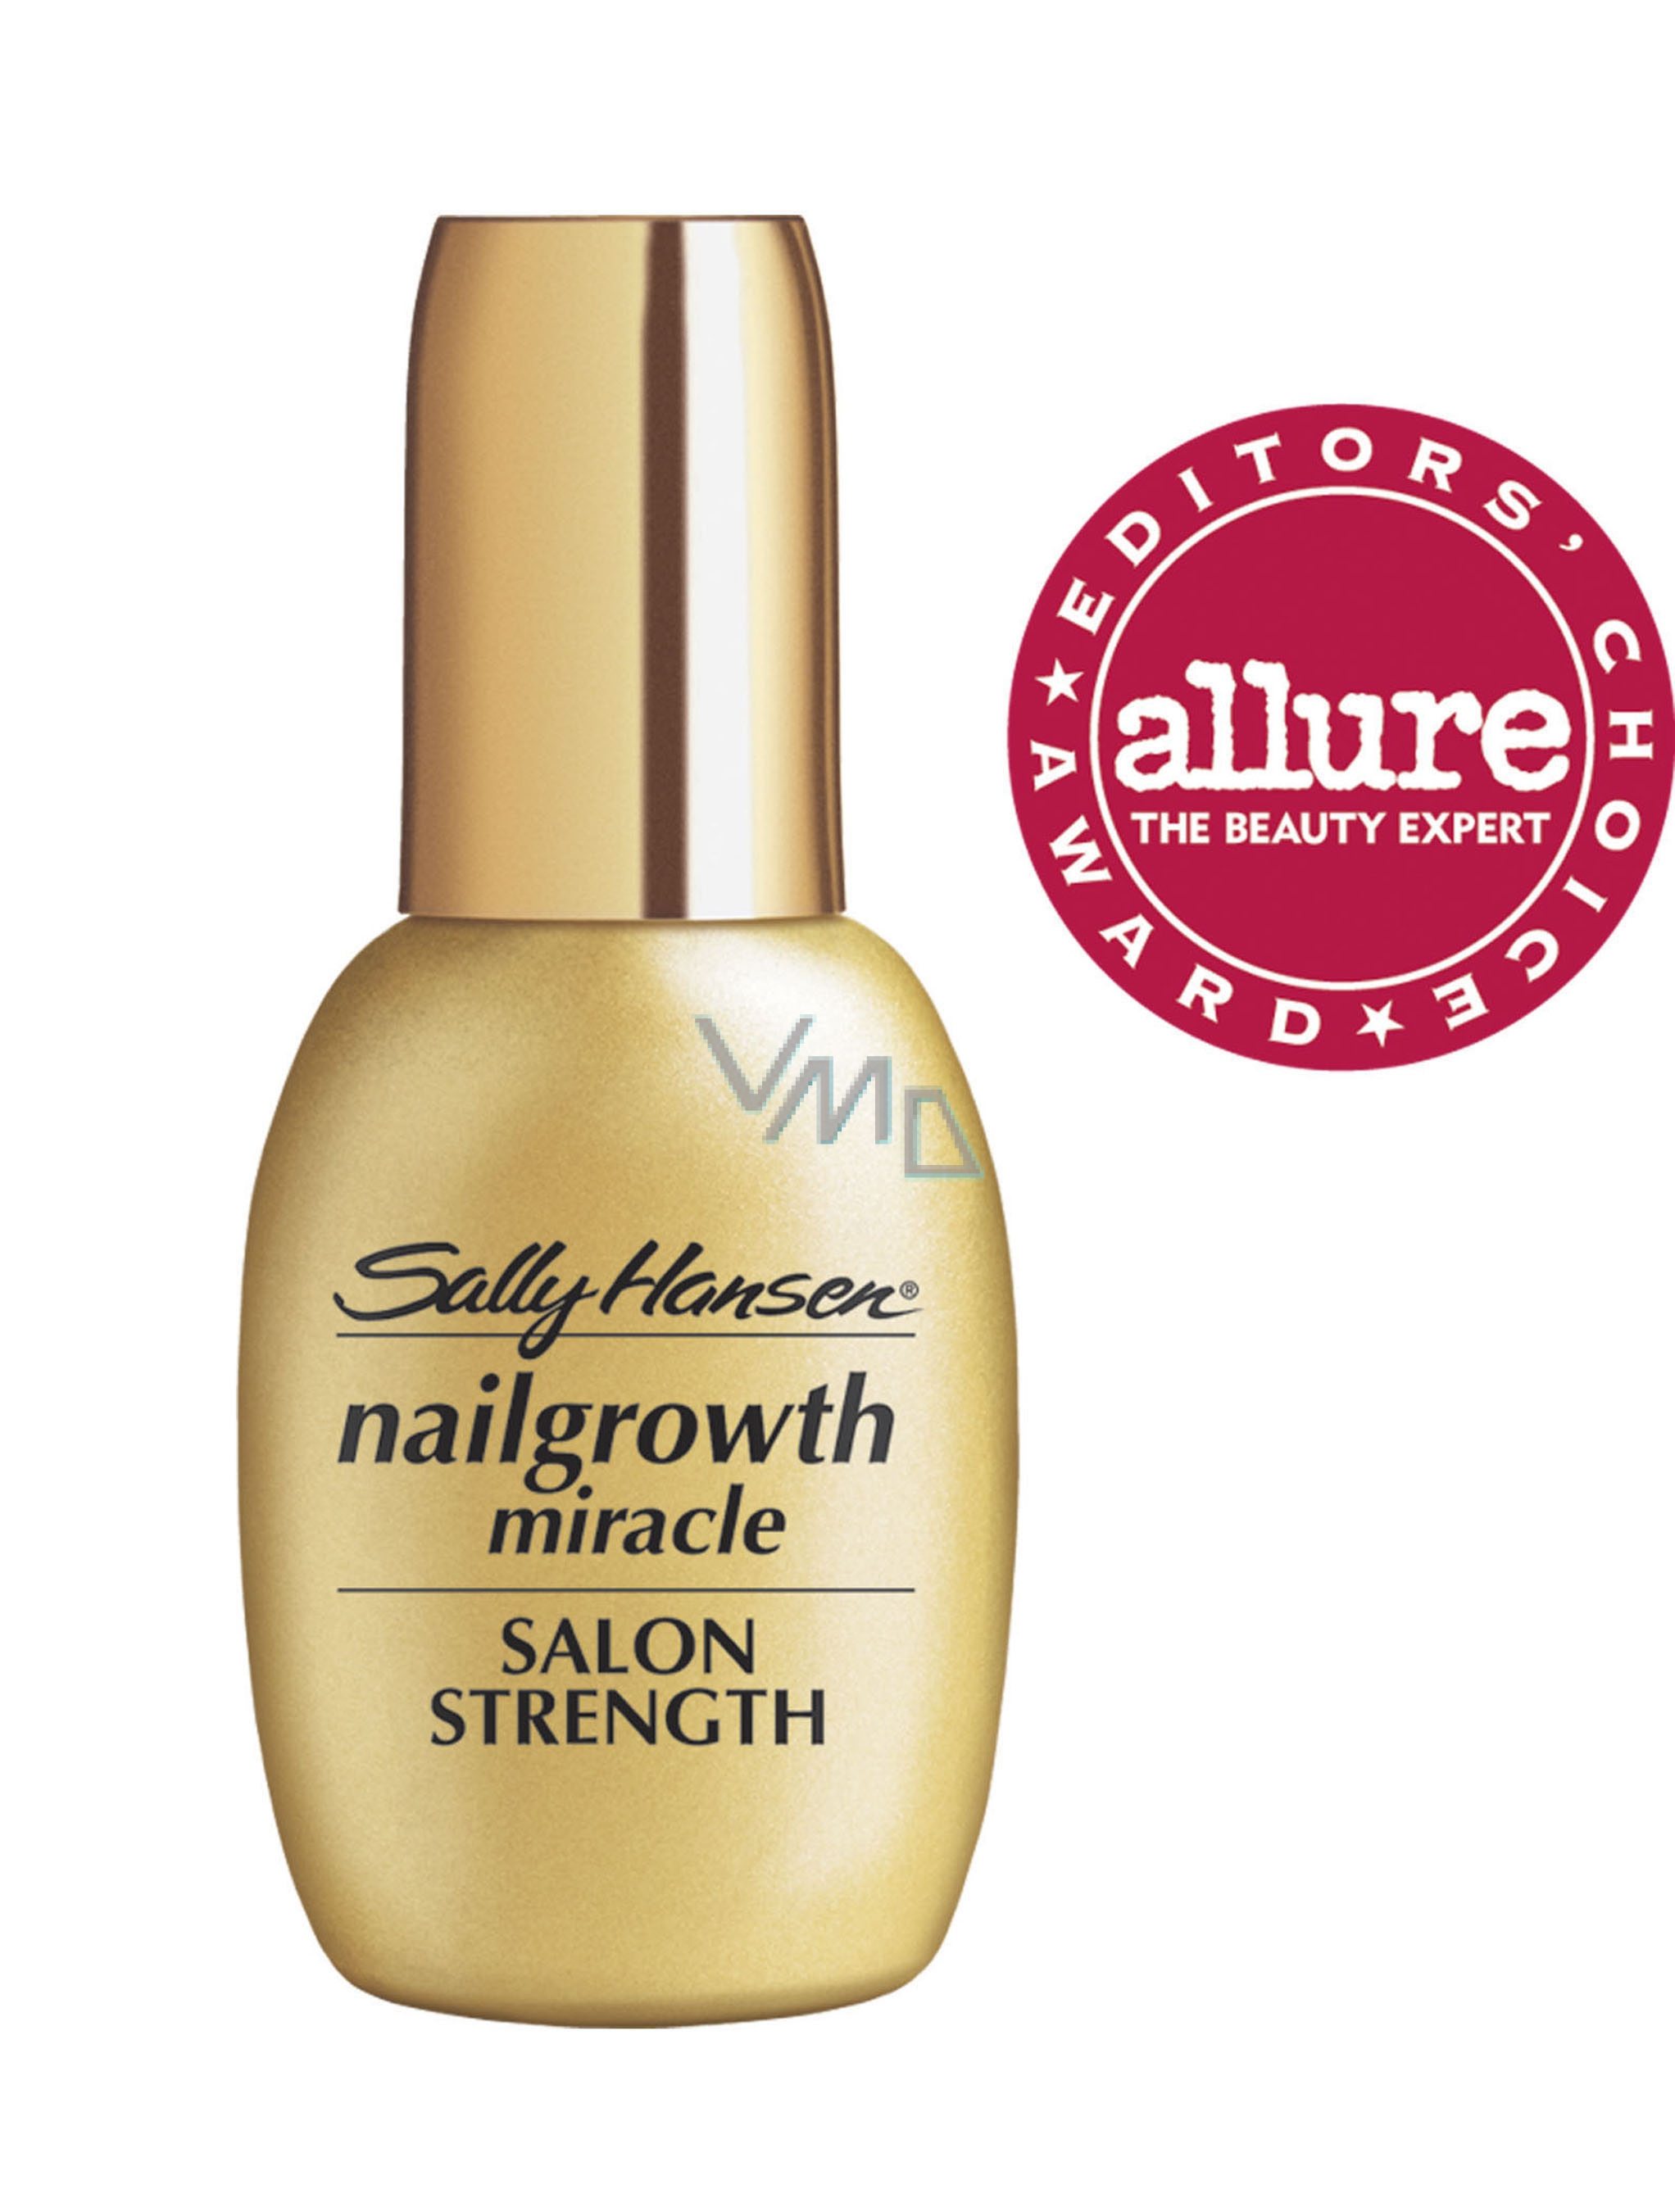 Sally Hansen Nailgrowth Miracle Professional nail treatment to grow without  breaking  ml - VMD parfumerie - drogerie